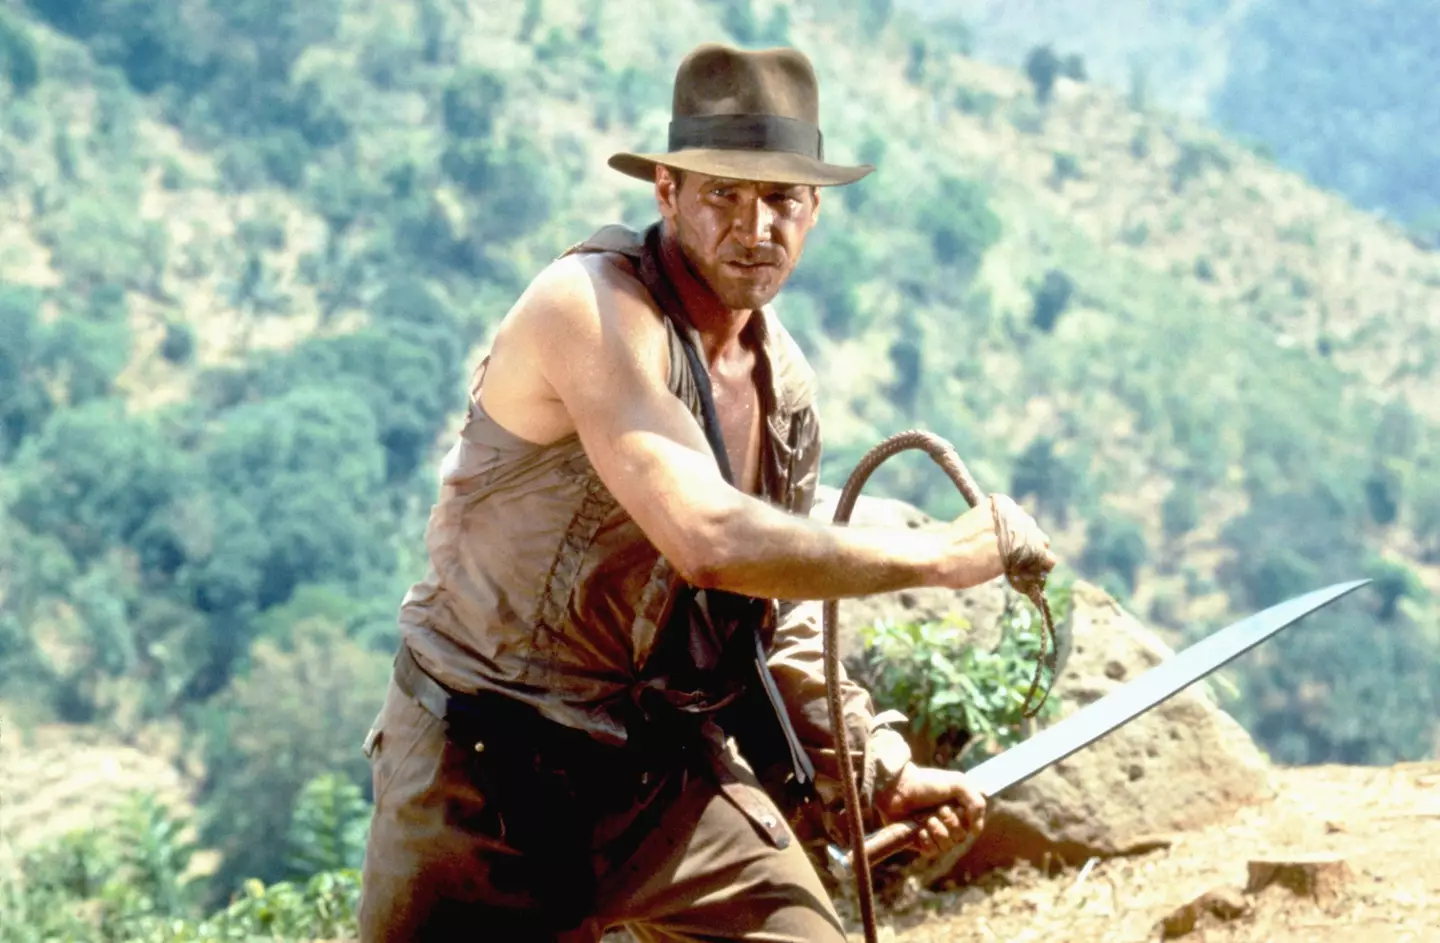 Harrison Ford has been Indiana Jones since 1981.